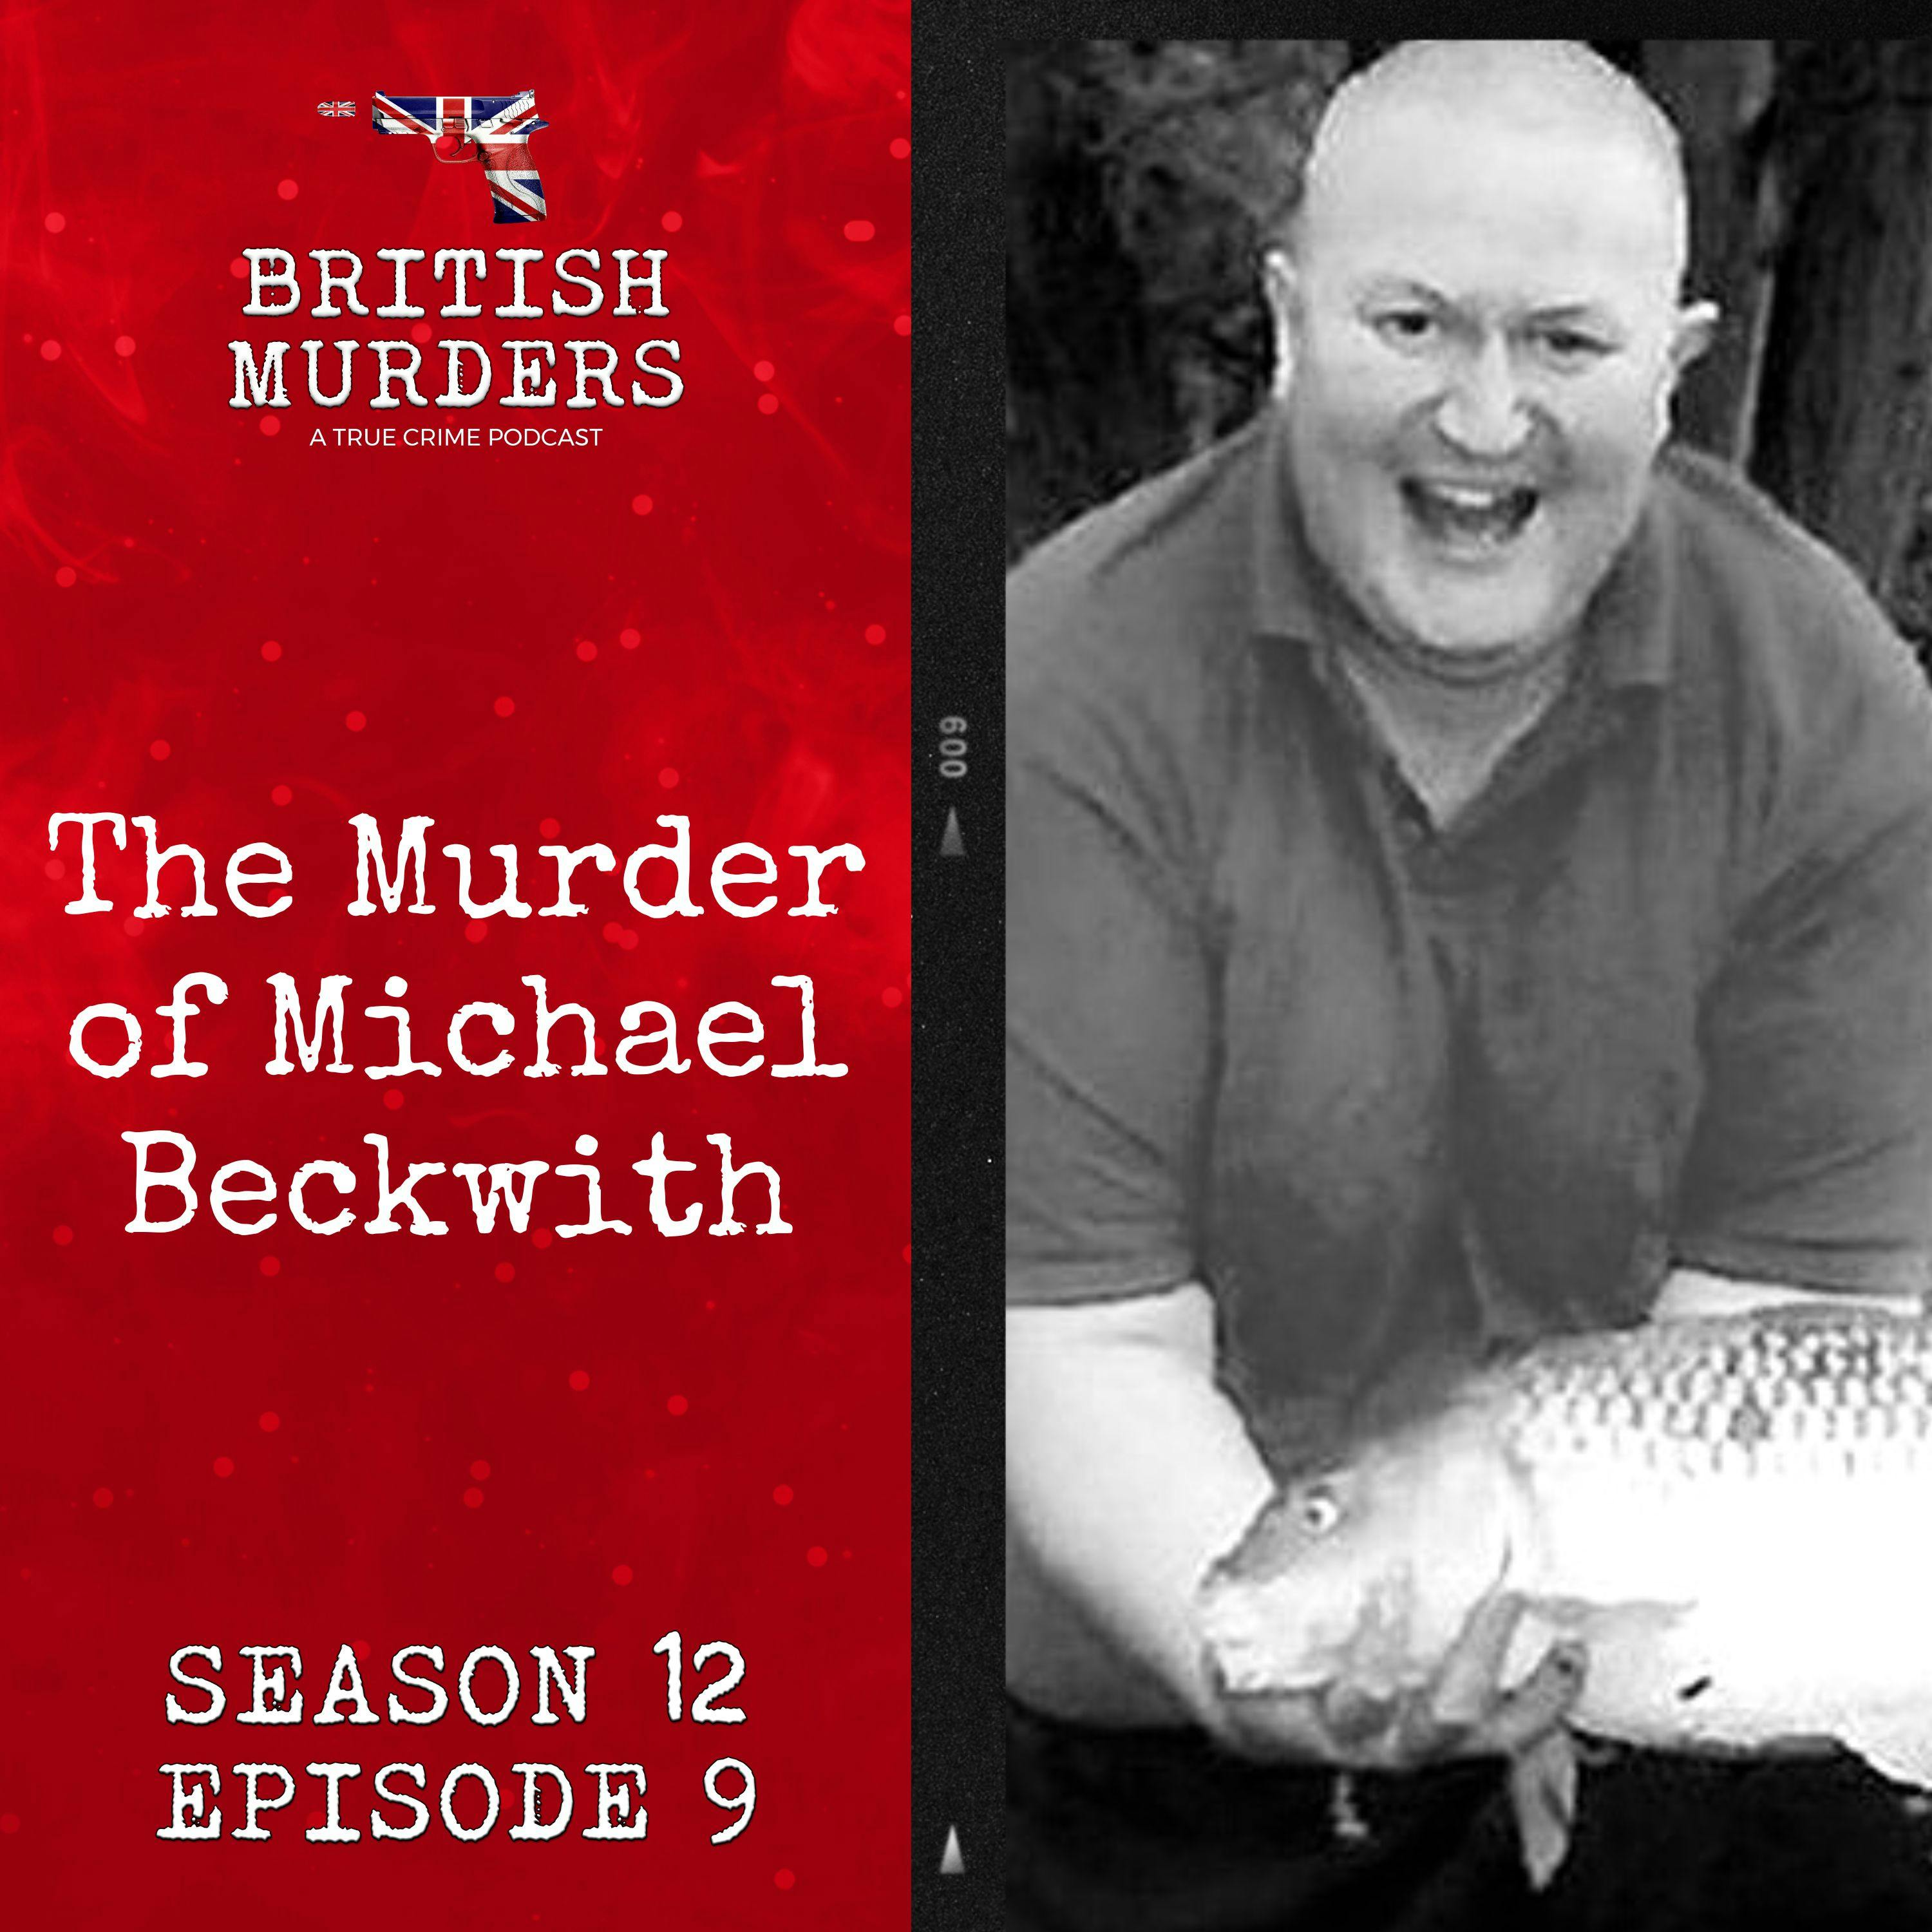 S12E09 | The Murder of Michael Beckwith (Harwich, Essex, 2016)